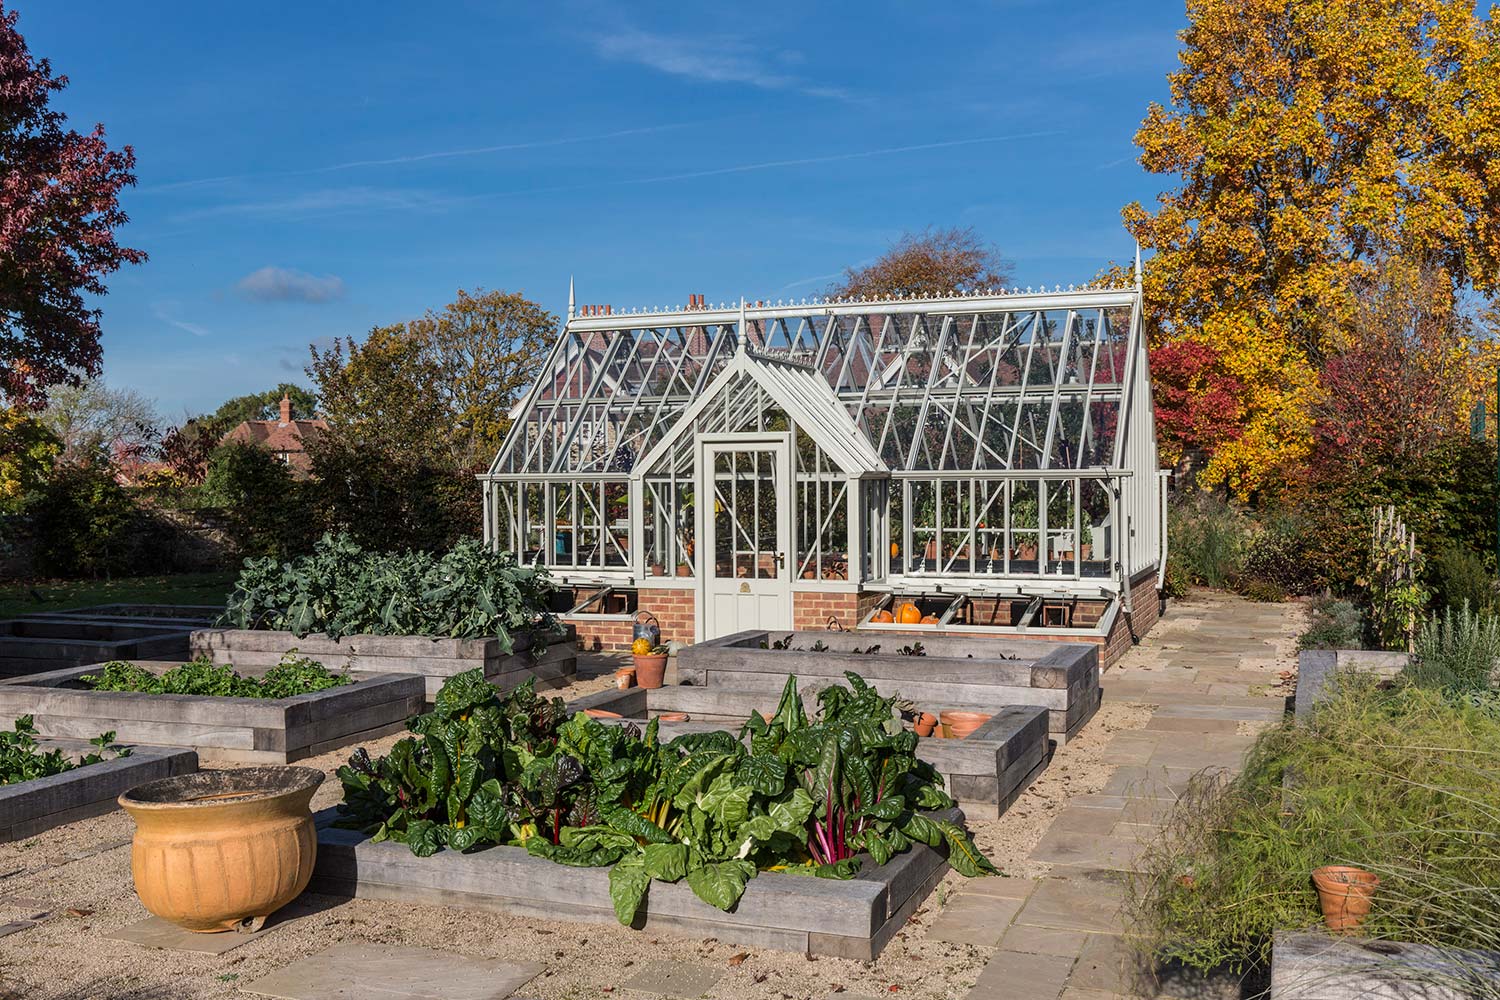 The Crane Greenhouse from the Alitex Kew Greenhouse Collection